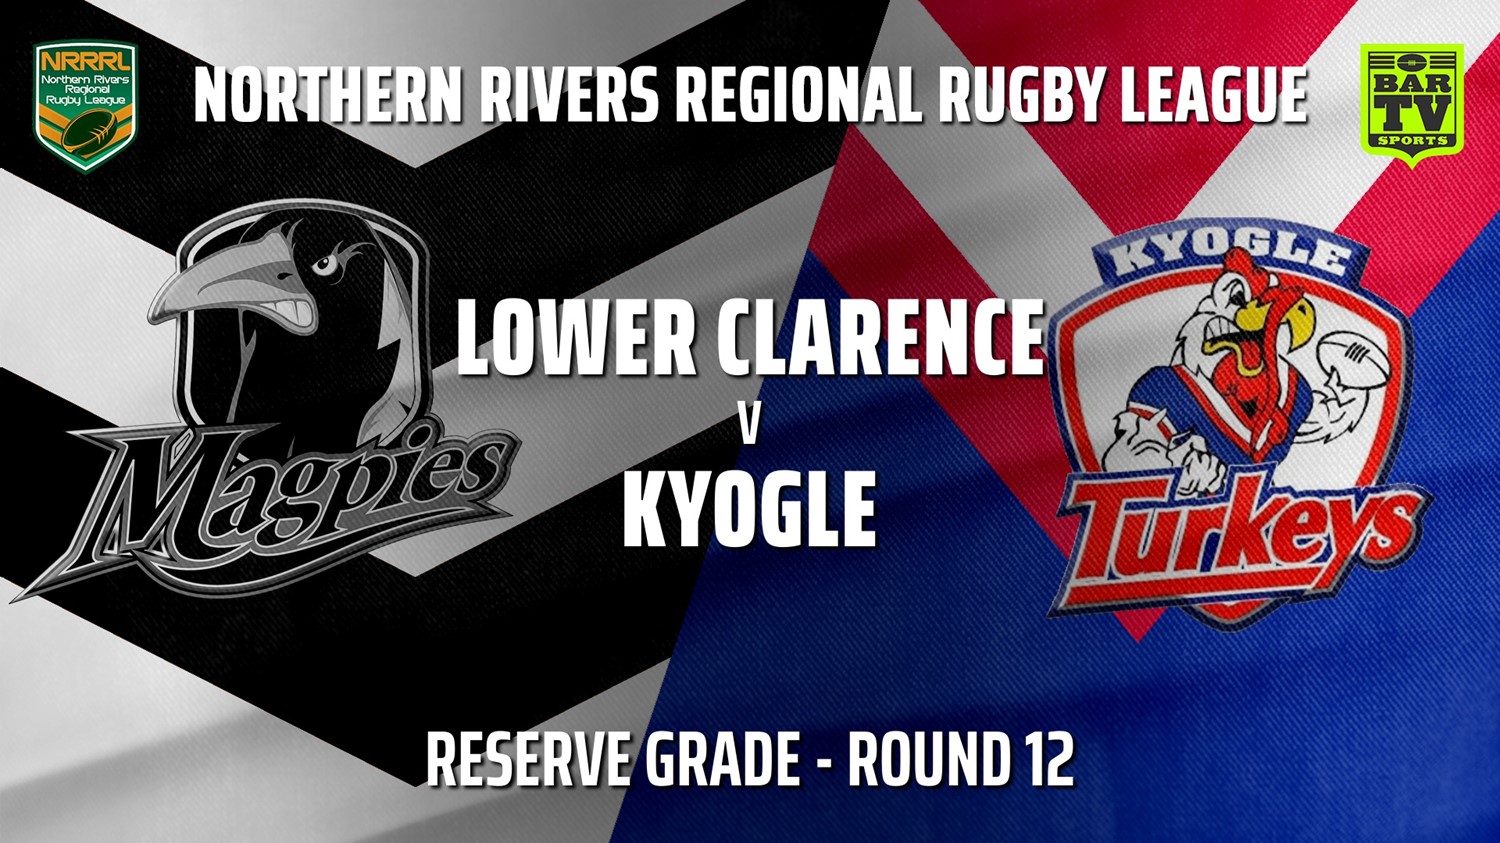 210725-Northern Rivers Round 12 - Reserve Grade - Lower Clarence Magpies v Kyogle Turkeys Slate Image